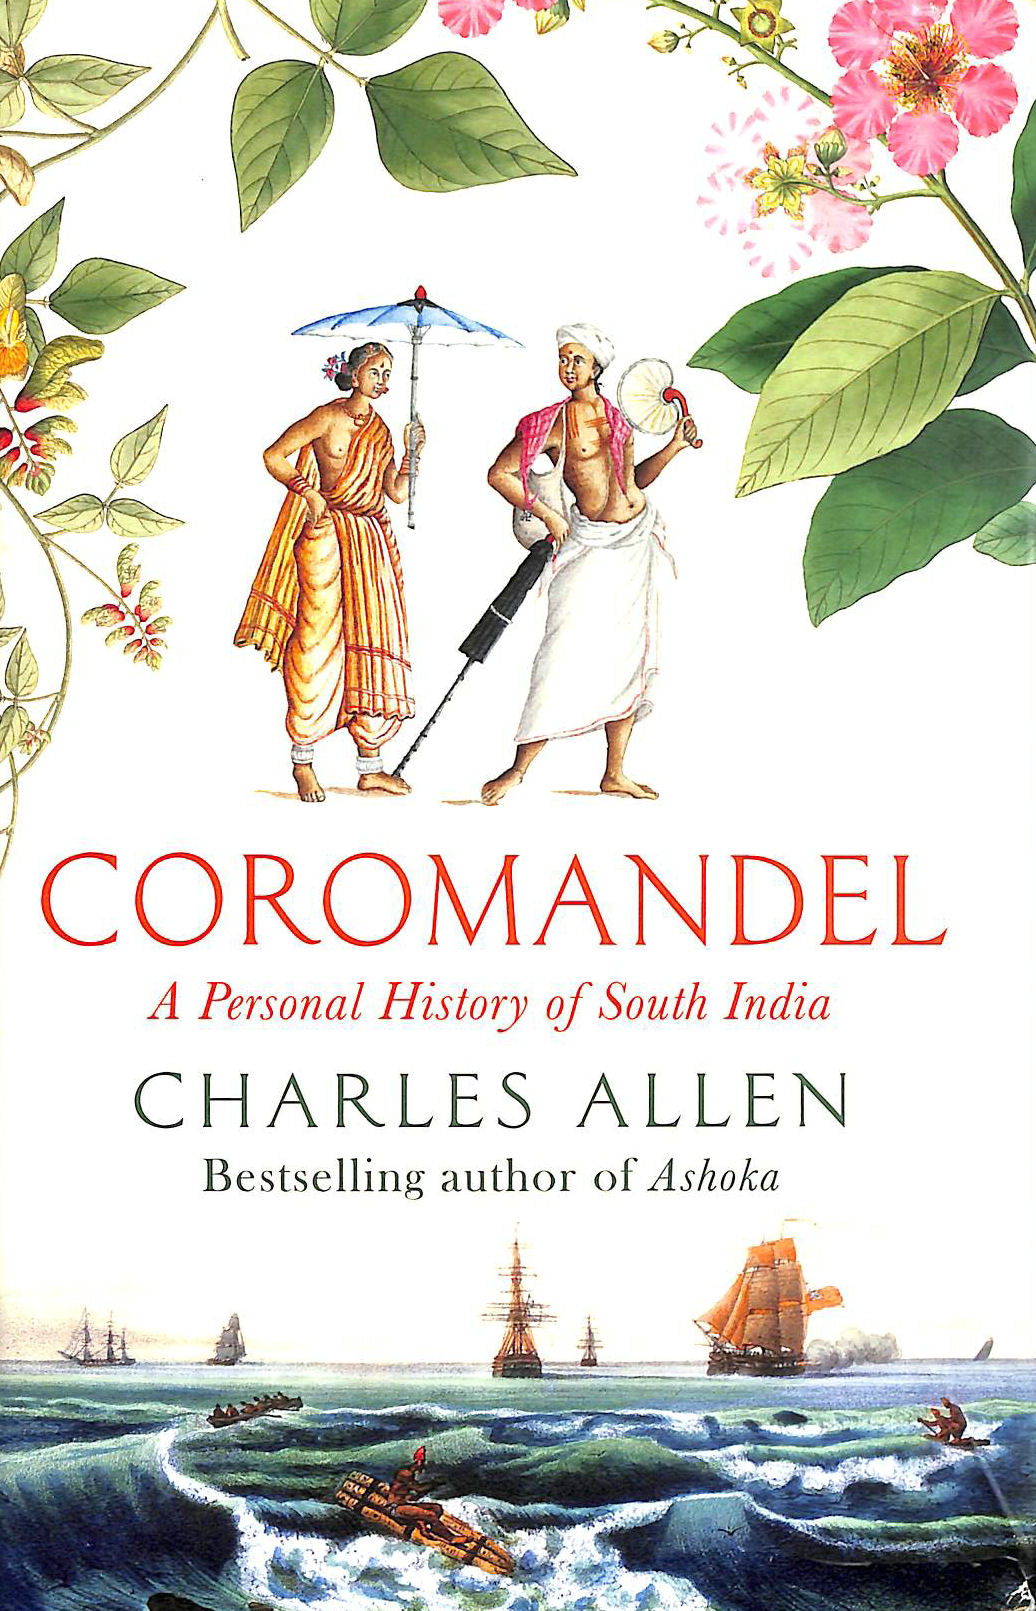 ALLEN, CHARLES - Coromandel: A Personal History of South India